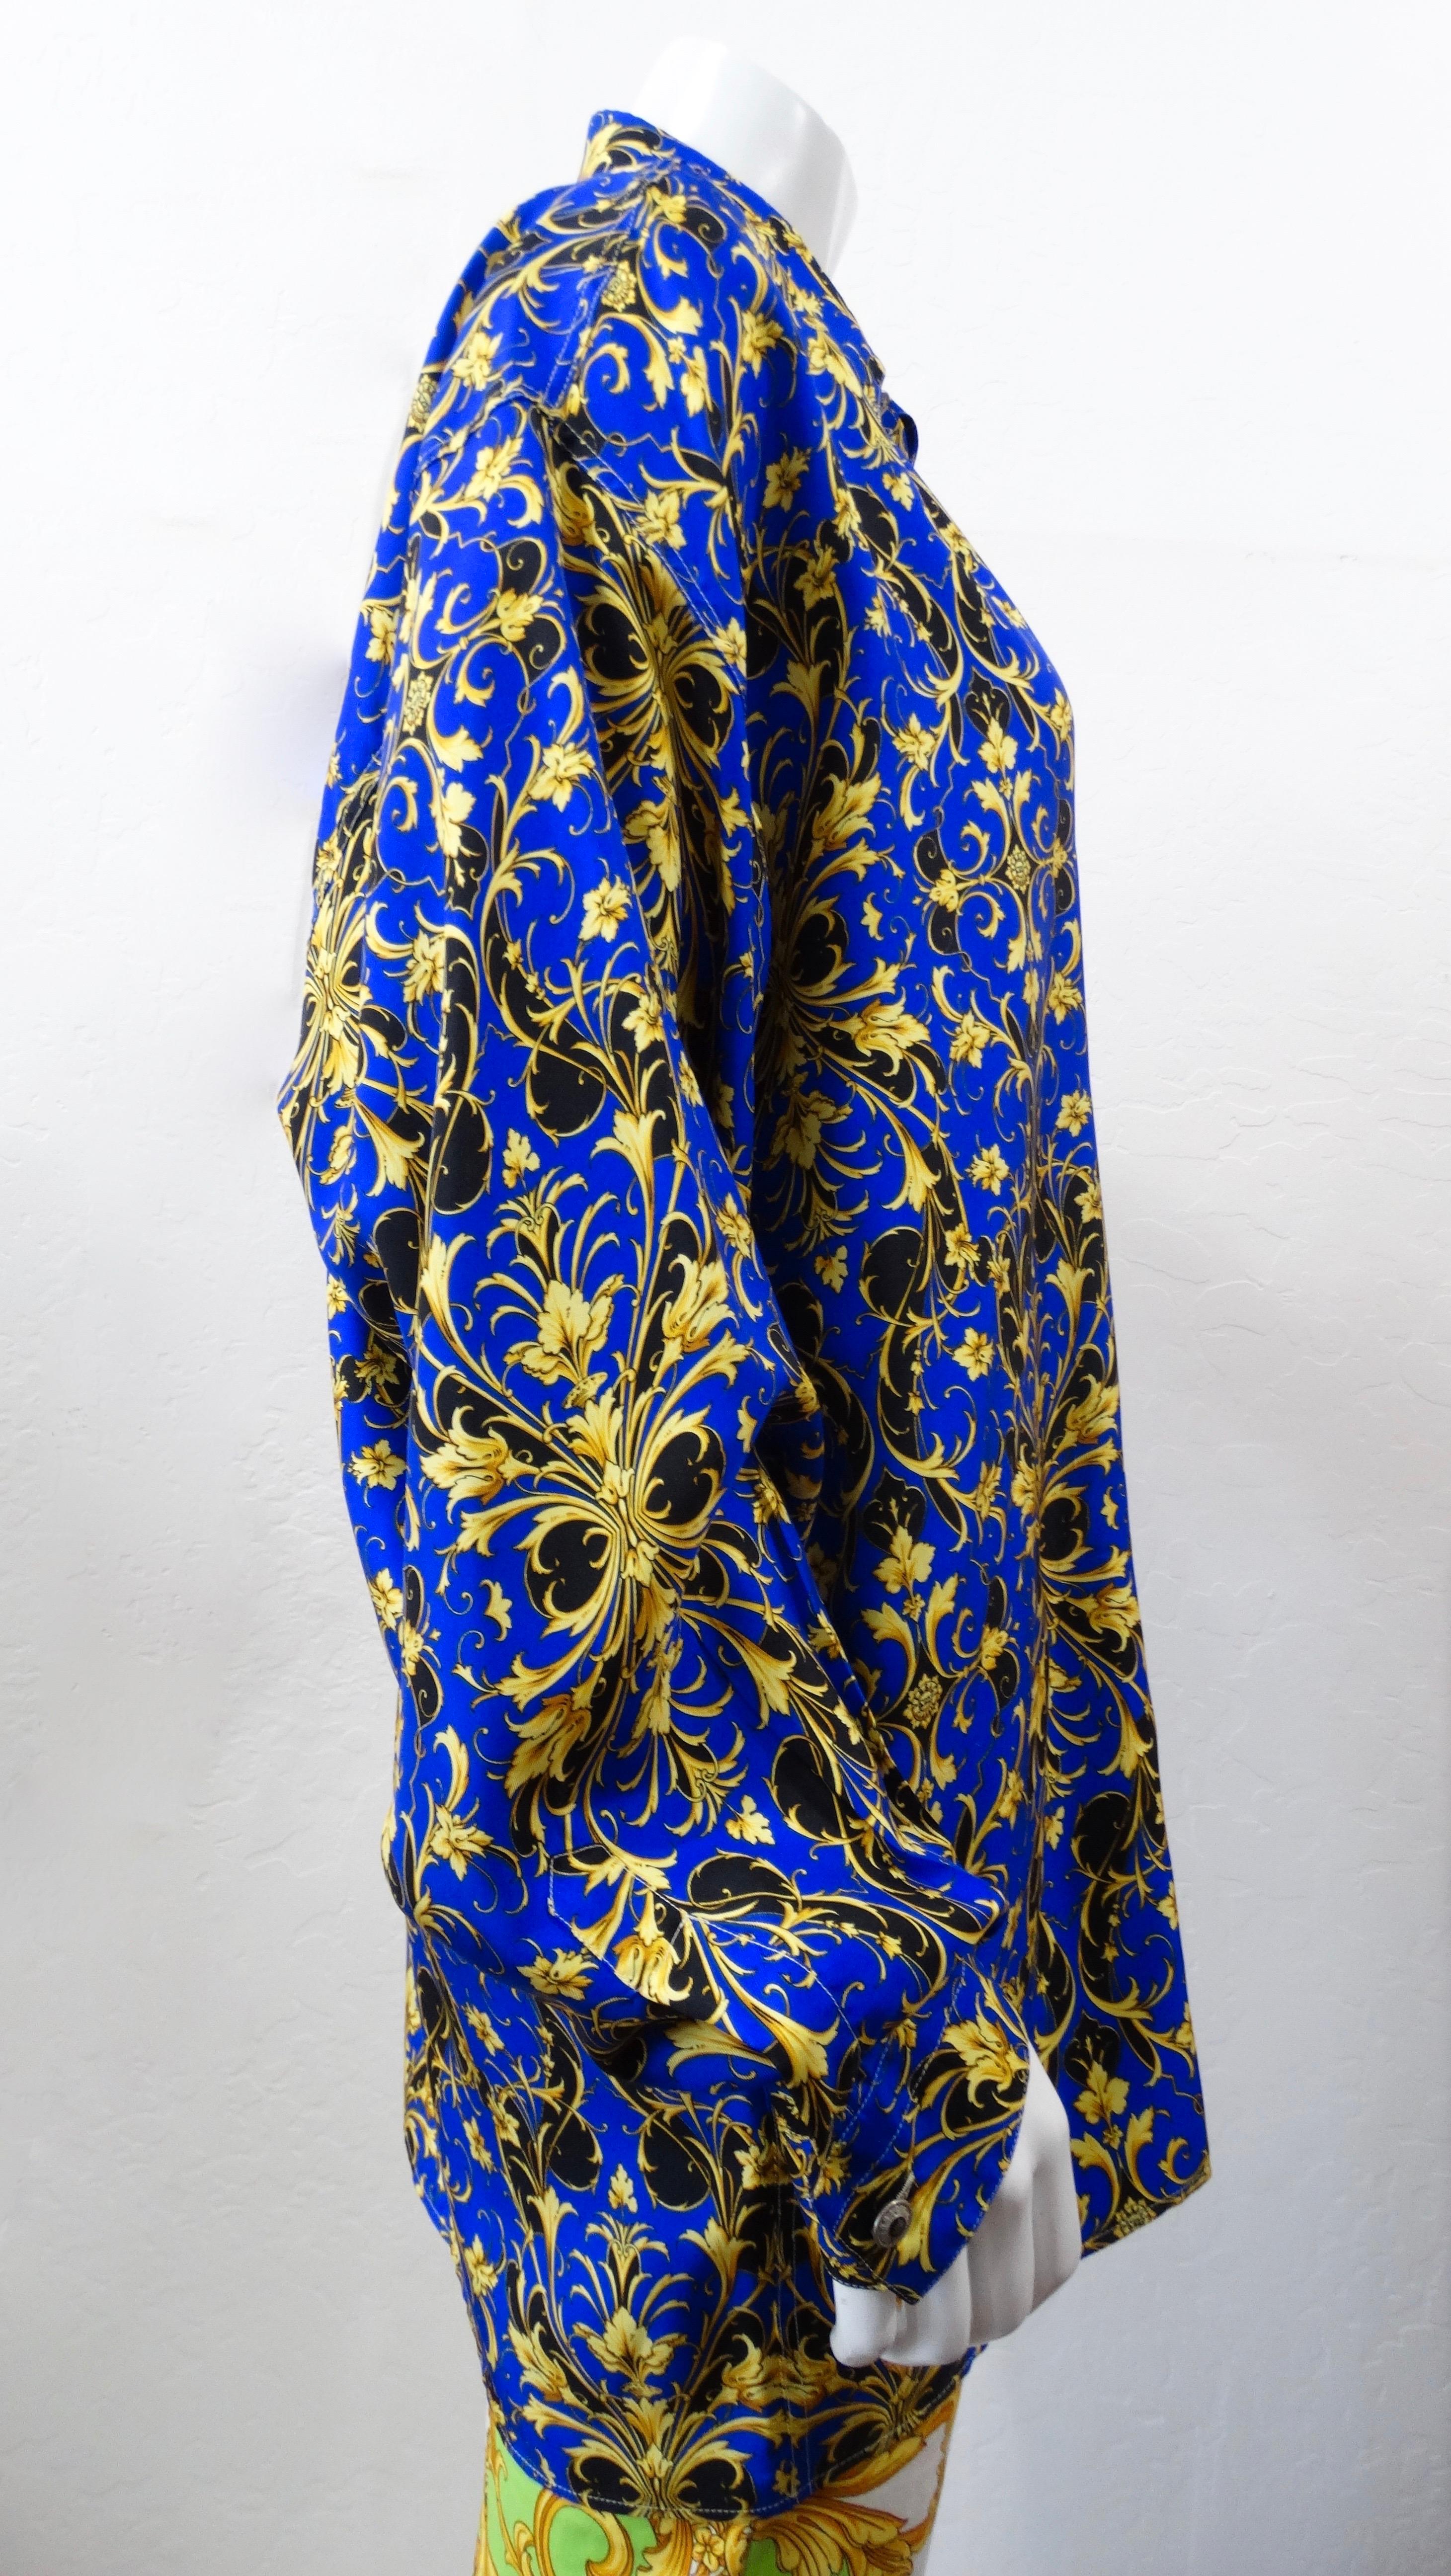 We all need a classic Versace Silk shirt in our wardrobe! Circa 1990s, this Versace Silk long sleeve button up is from the Classic V2 collection and features one of Gianni Versace's signature Baroque style prints in gold, cobalt blue and black.